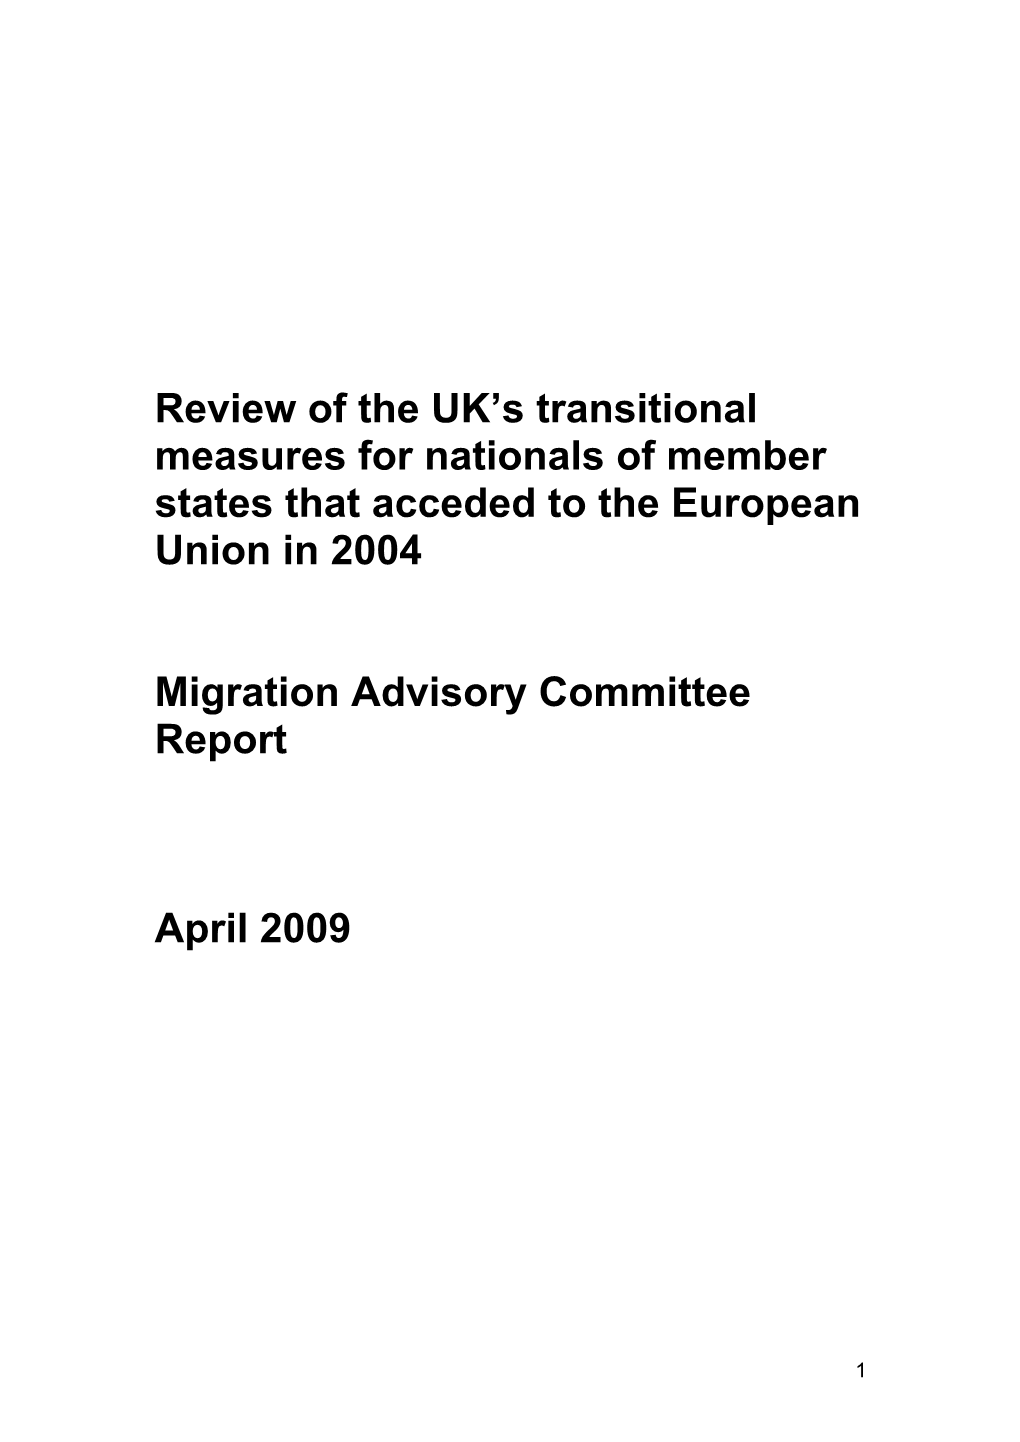 The Worker Registration Scheme and A8 Immigration Since 2004